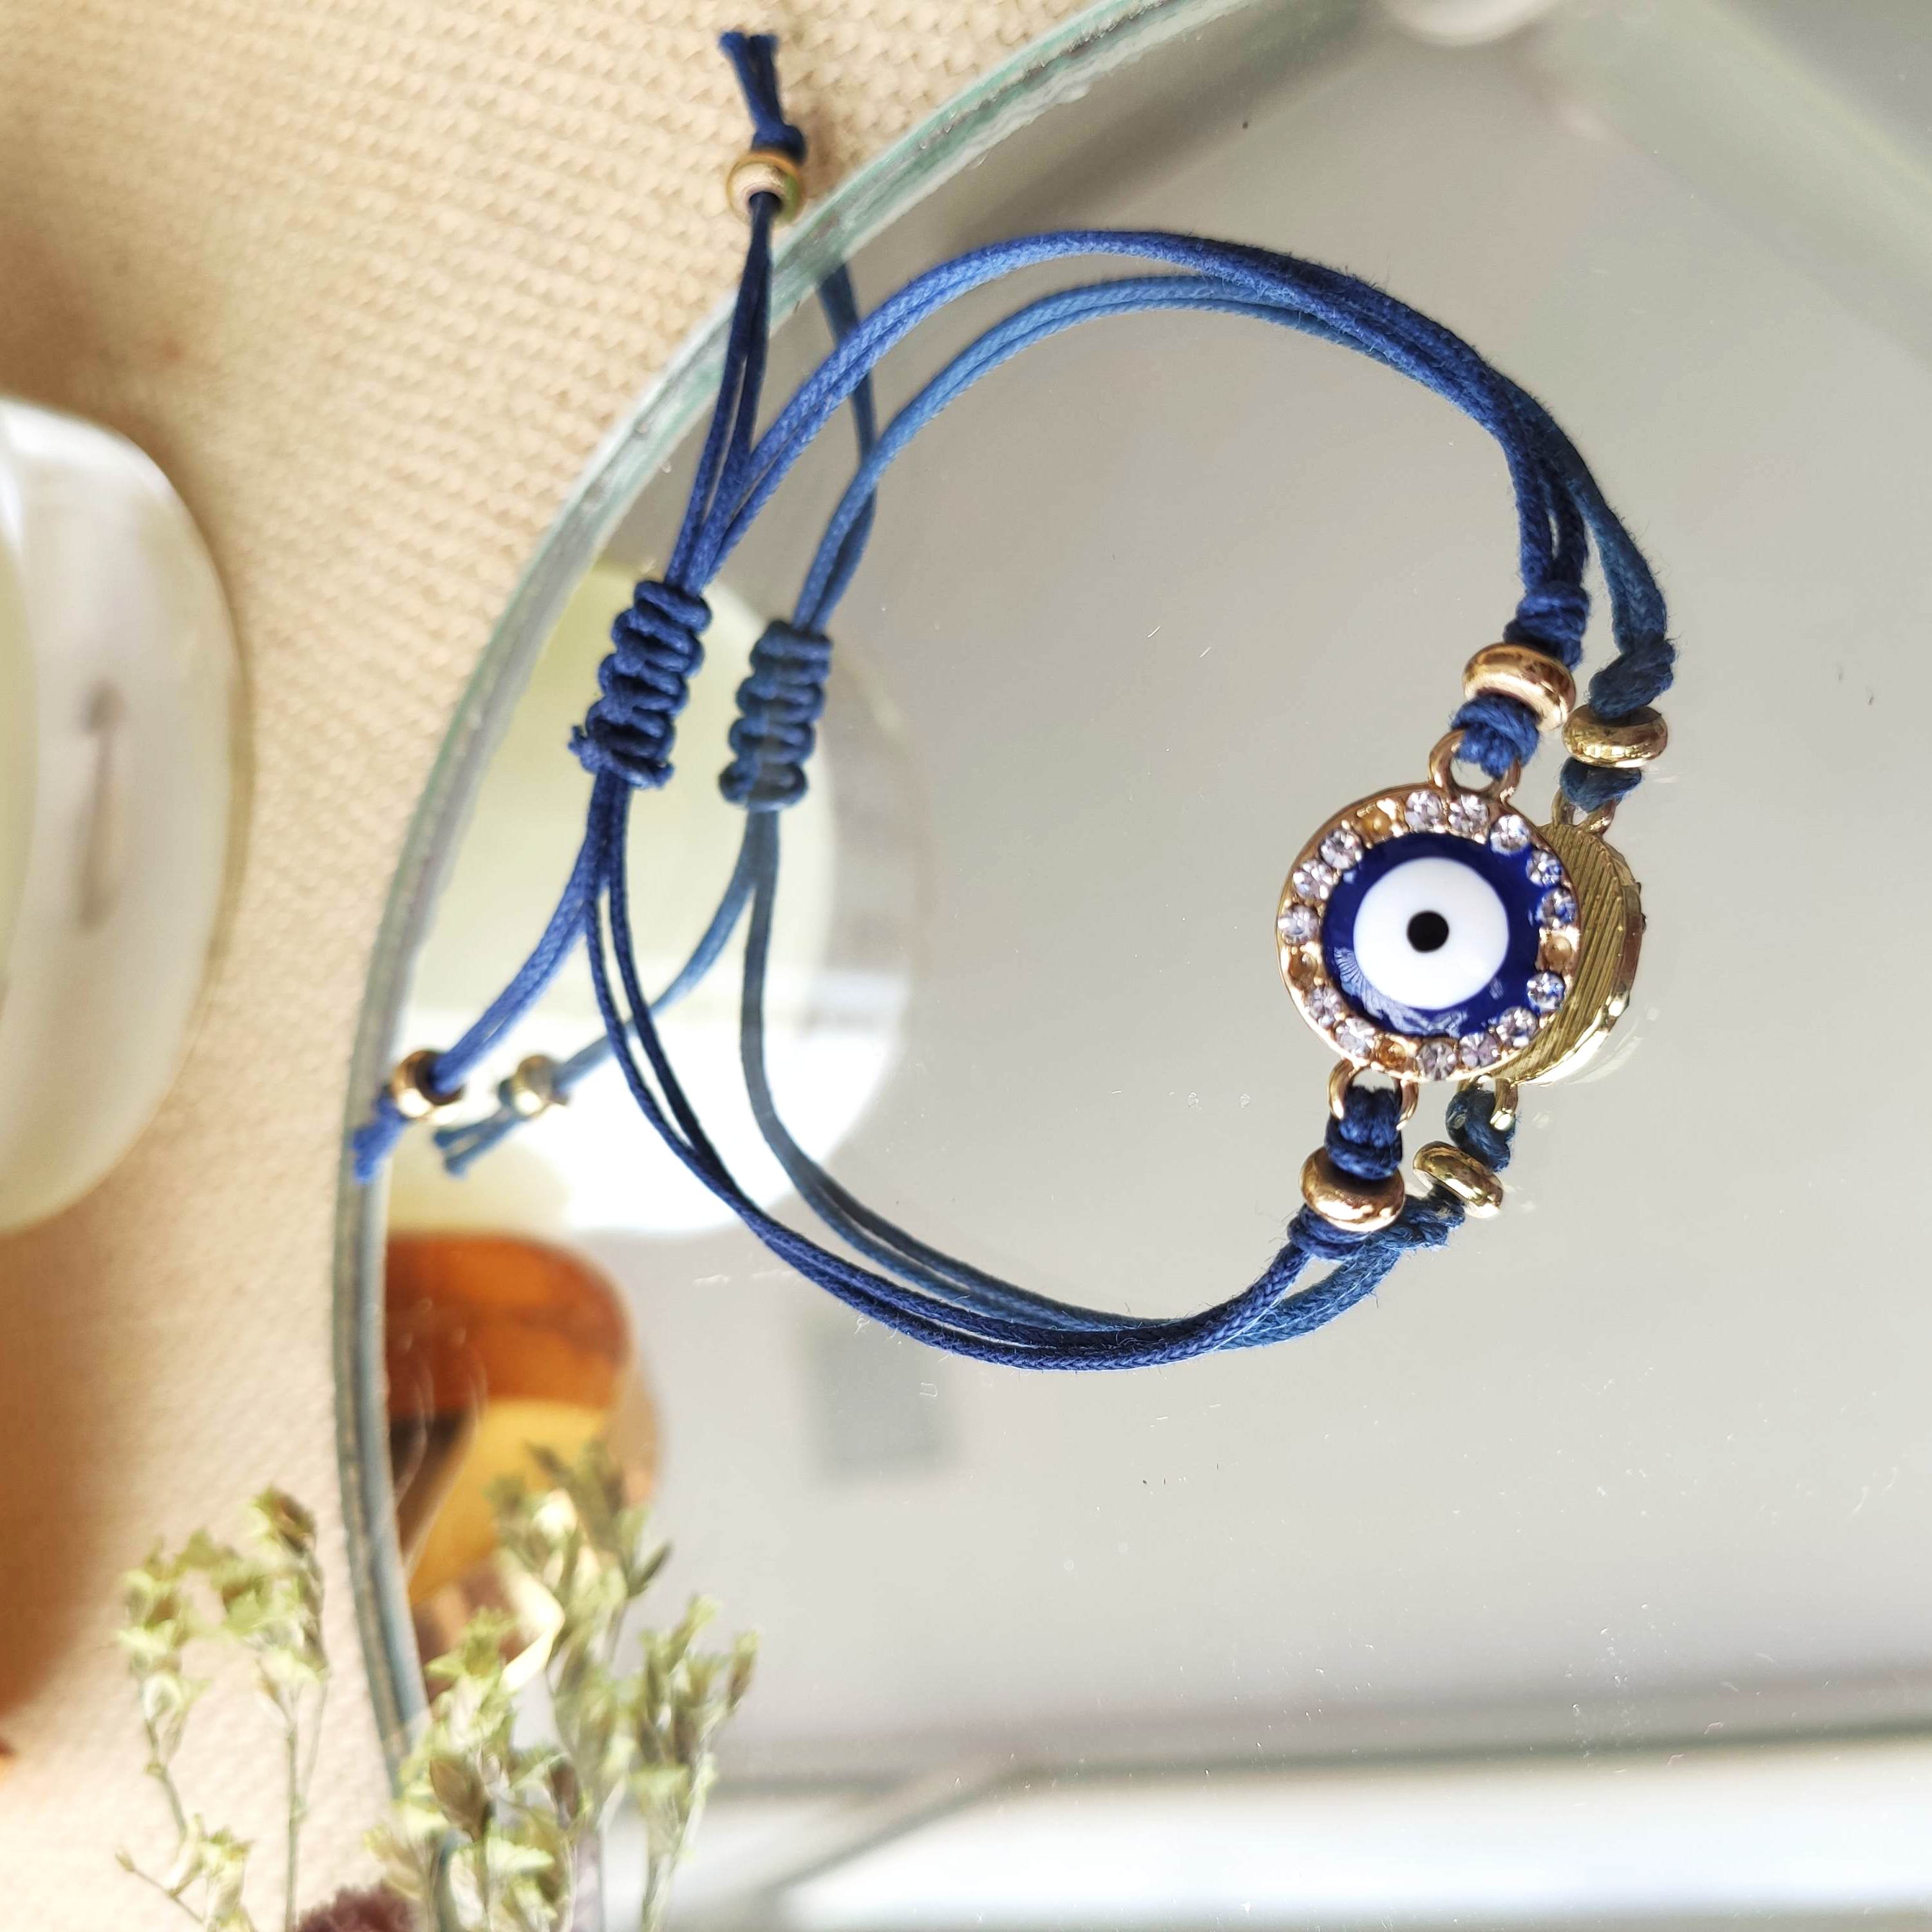 TFC Round Evil Eye Blue Adjustable Bracelet-Discover our stunning collection of stylish bracelets for women, featuring exquisite pearl bracelets, handcrafted beaded bracelets, and elegant gold-plated designs. Enjoy cheapest anti-tarnish fashion jewellery and long-lasting brilliance only at The Fun Company.